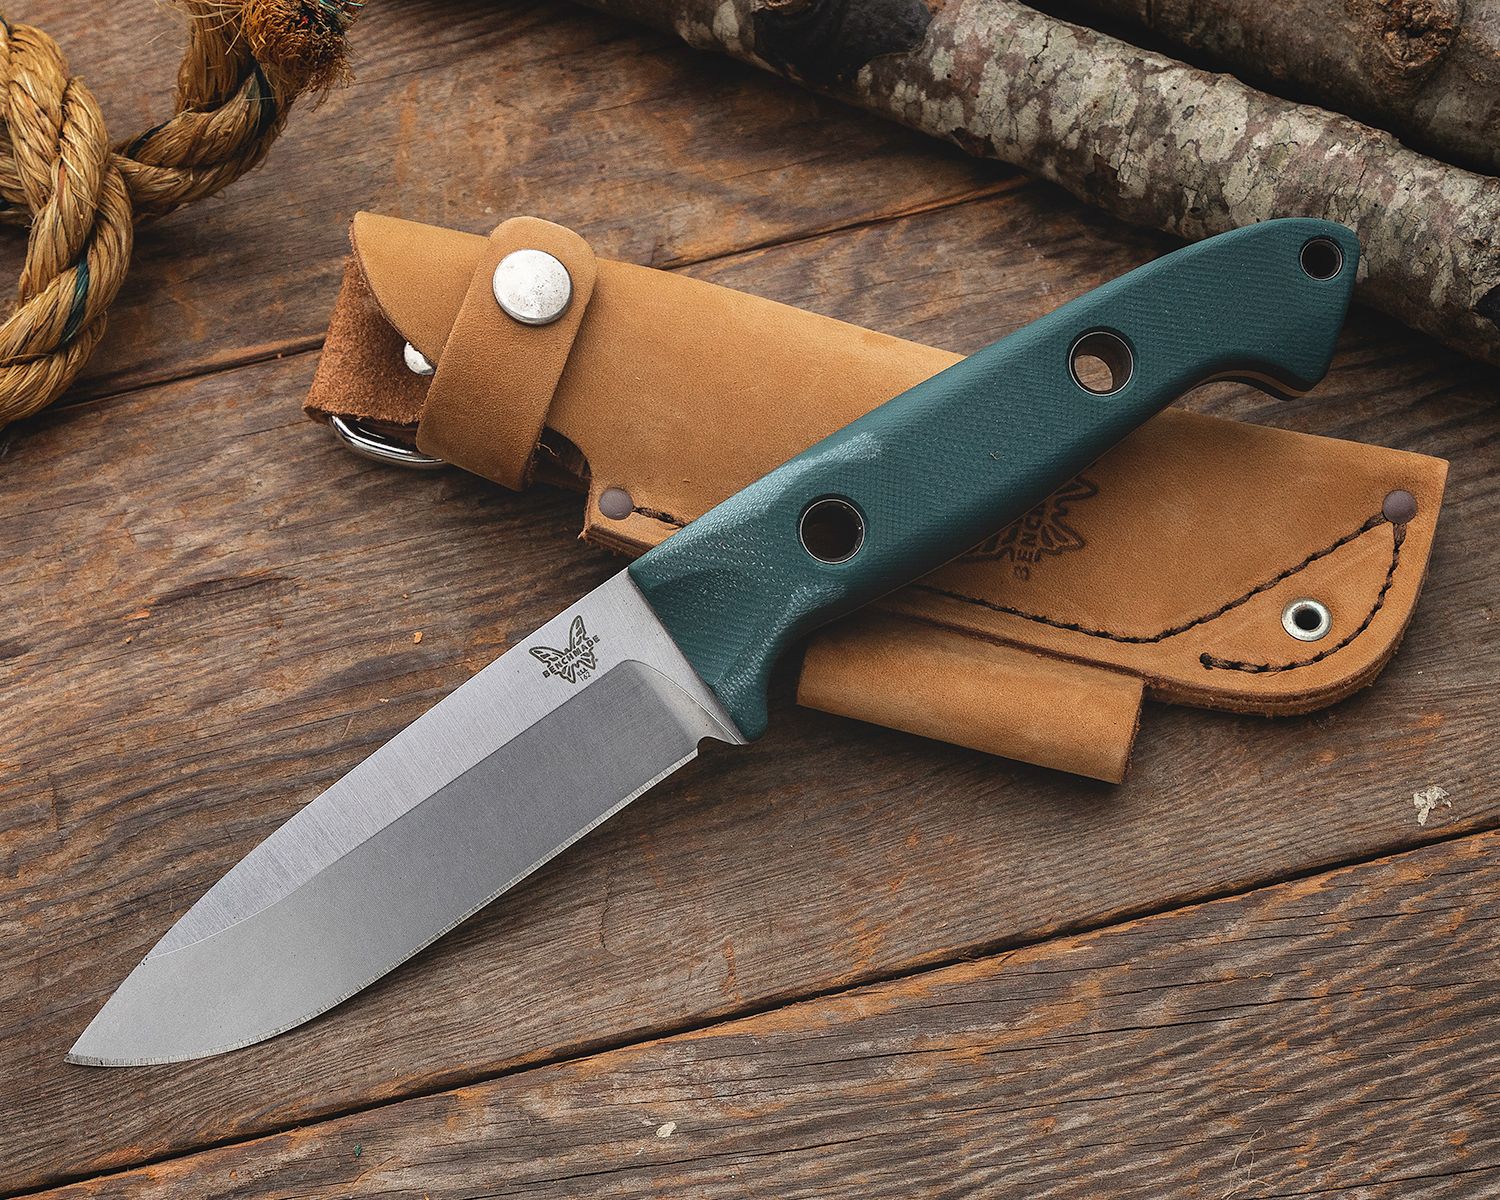 Benchmade 162 Bushcrafter Fixed Blade Knife – S30V Steel w/ Leather Sheath